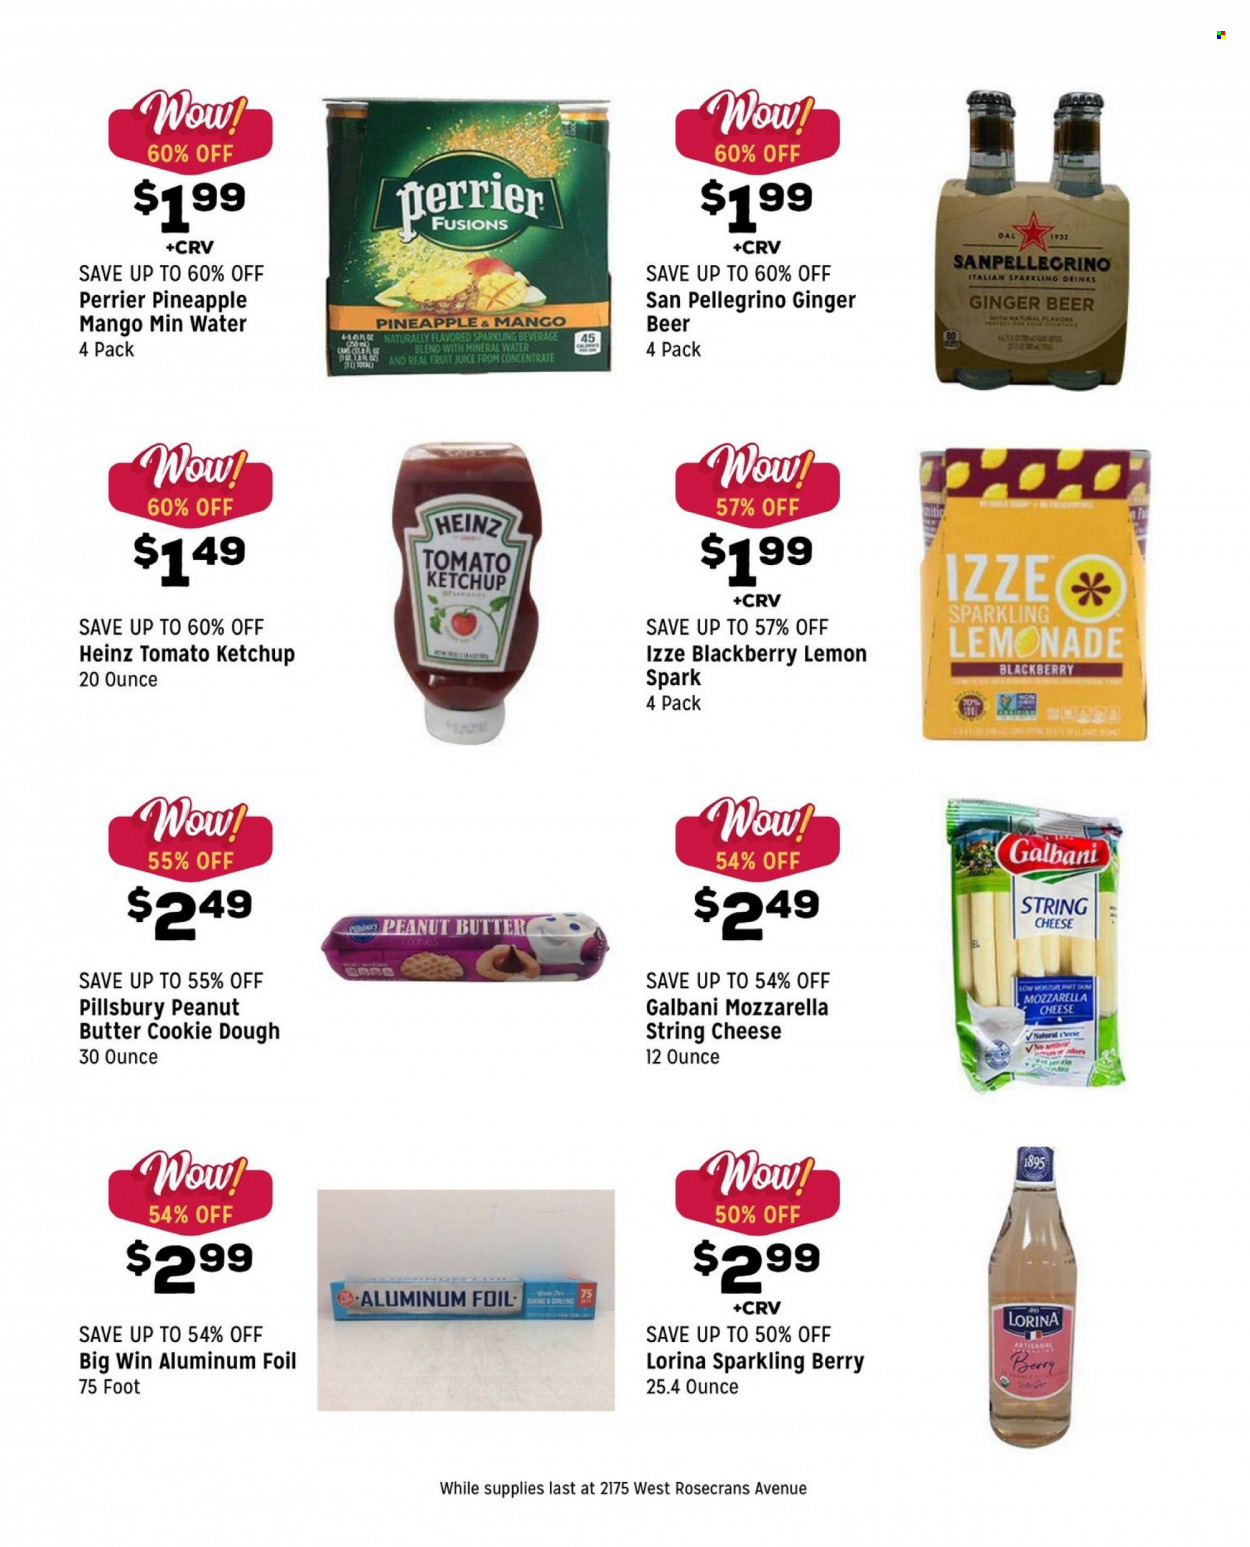 Grocery Outlet ad  - 01.12.2022 - 01.18.2022.